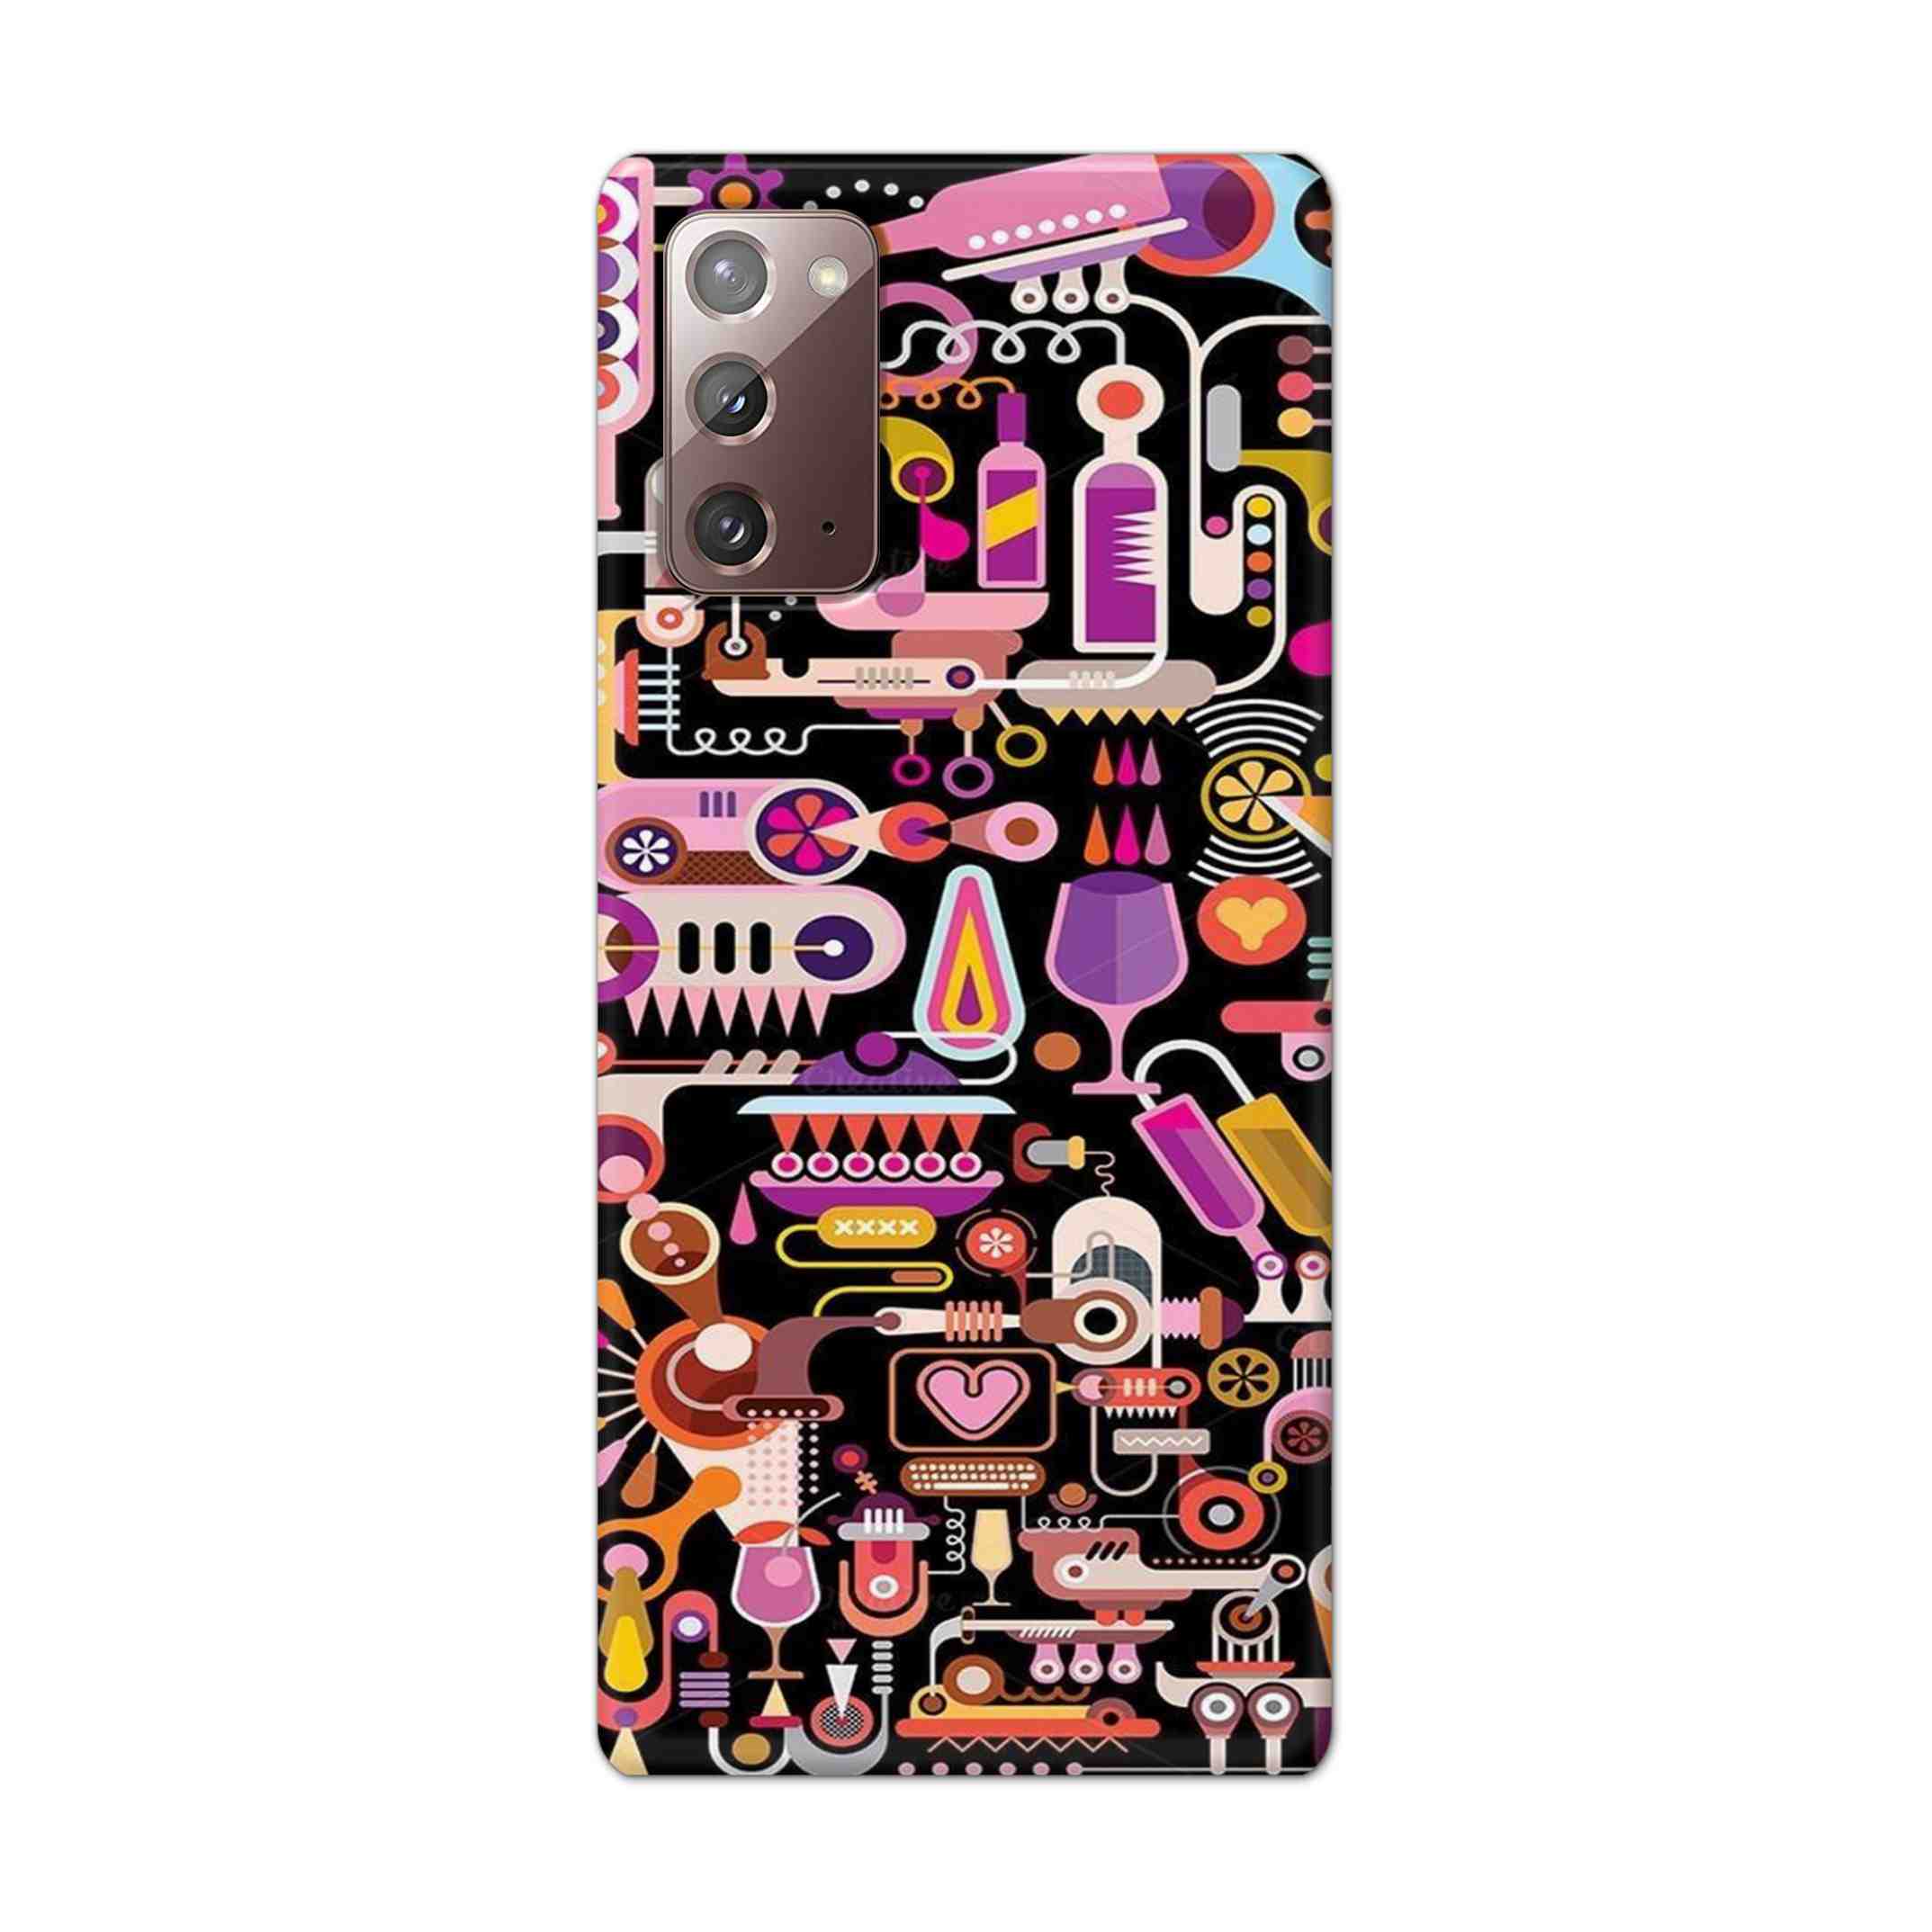 Buy Lab Art Hard Back Mobile Phone Case Cover For Samsung Galaxy Note 20 Online